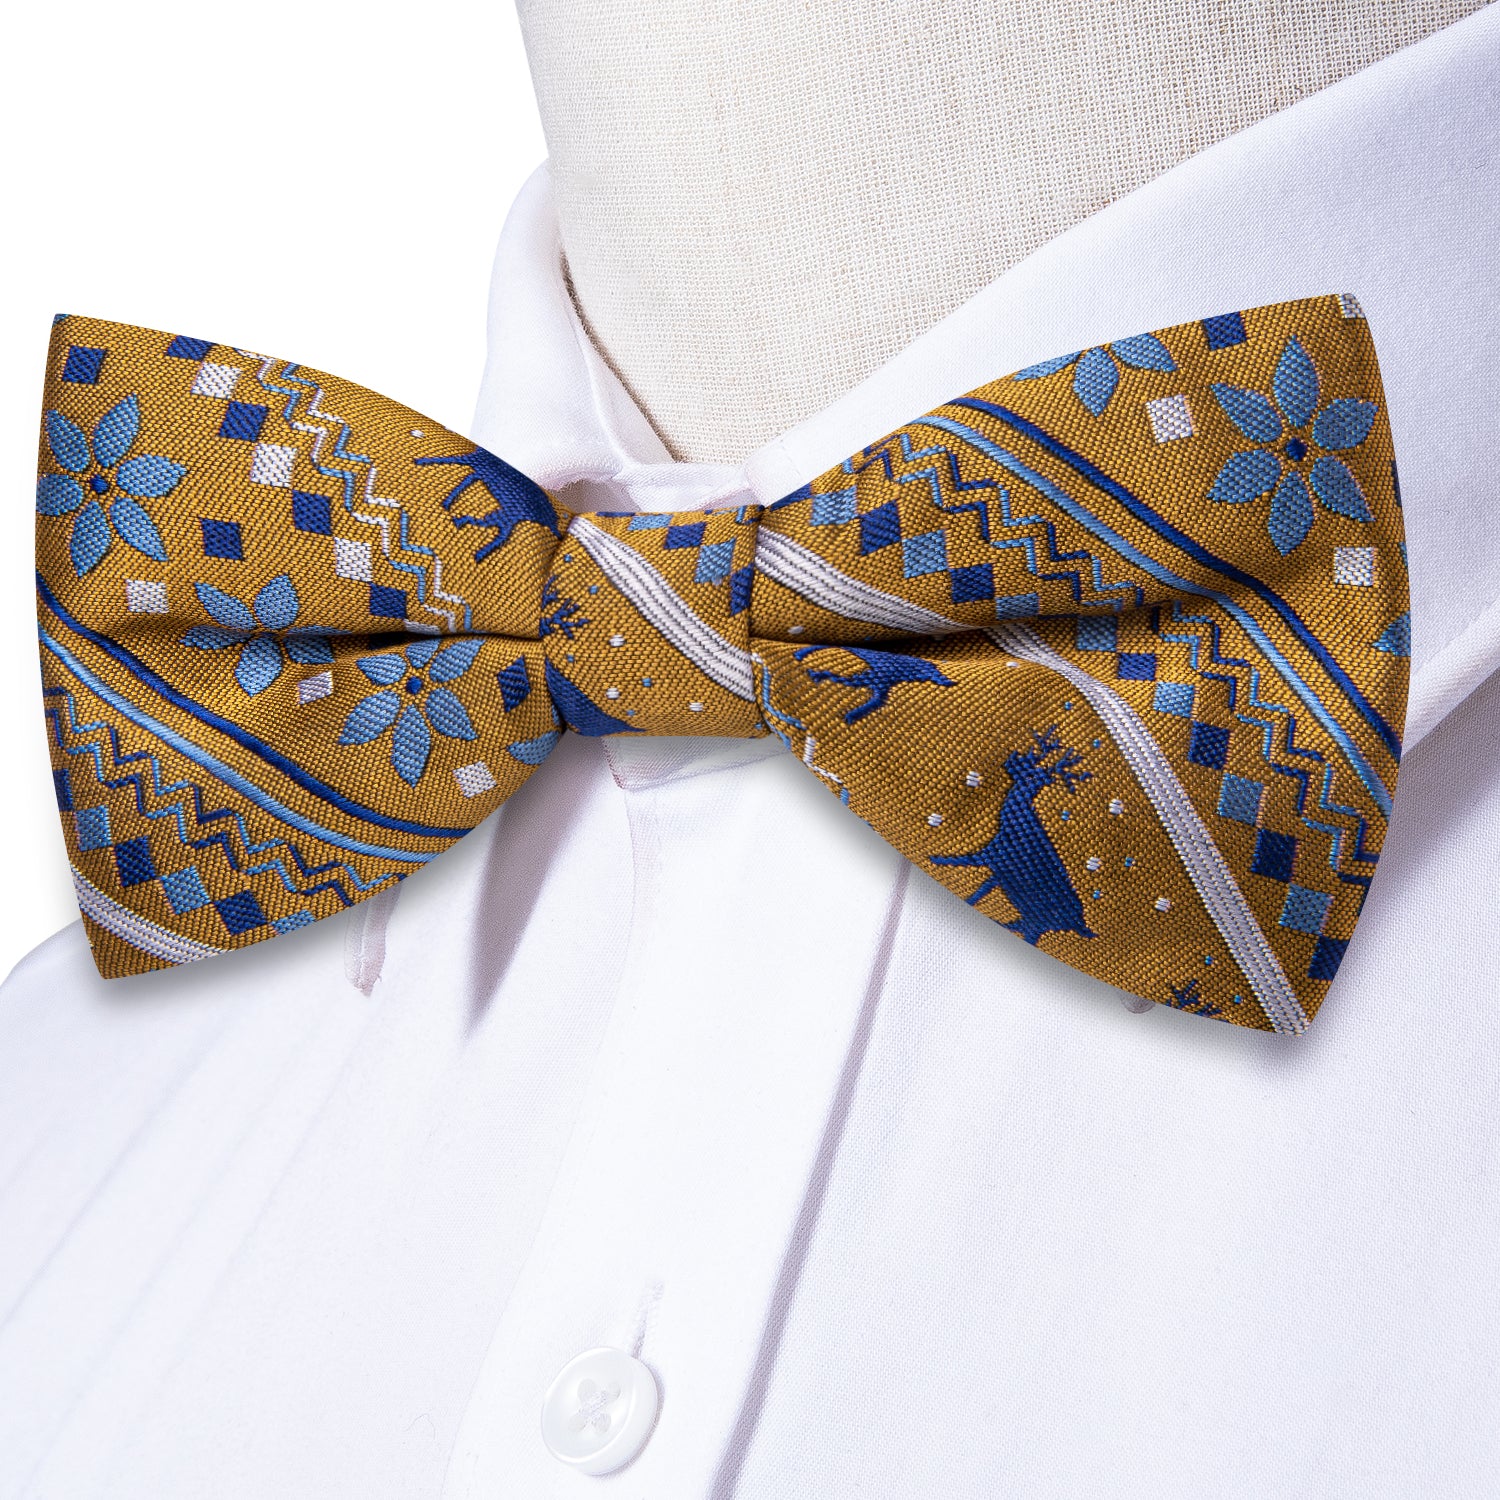 Christmas Gold Yellow Novelty Pre-tied Bow Tie Hanky Cufflinks Set